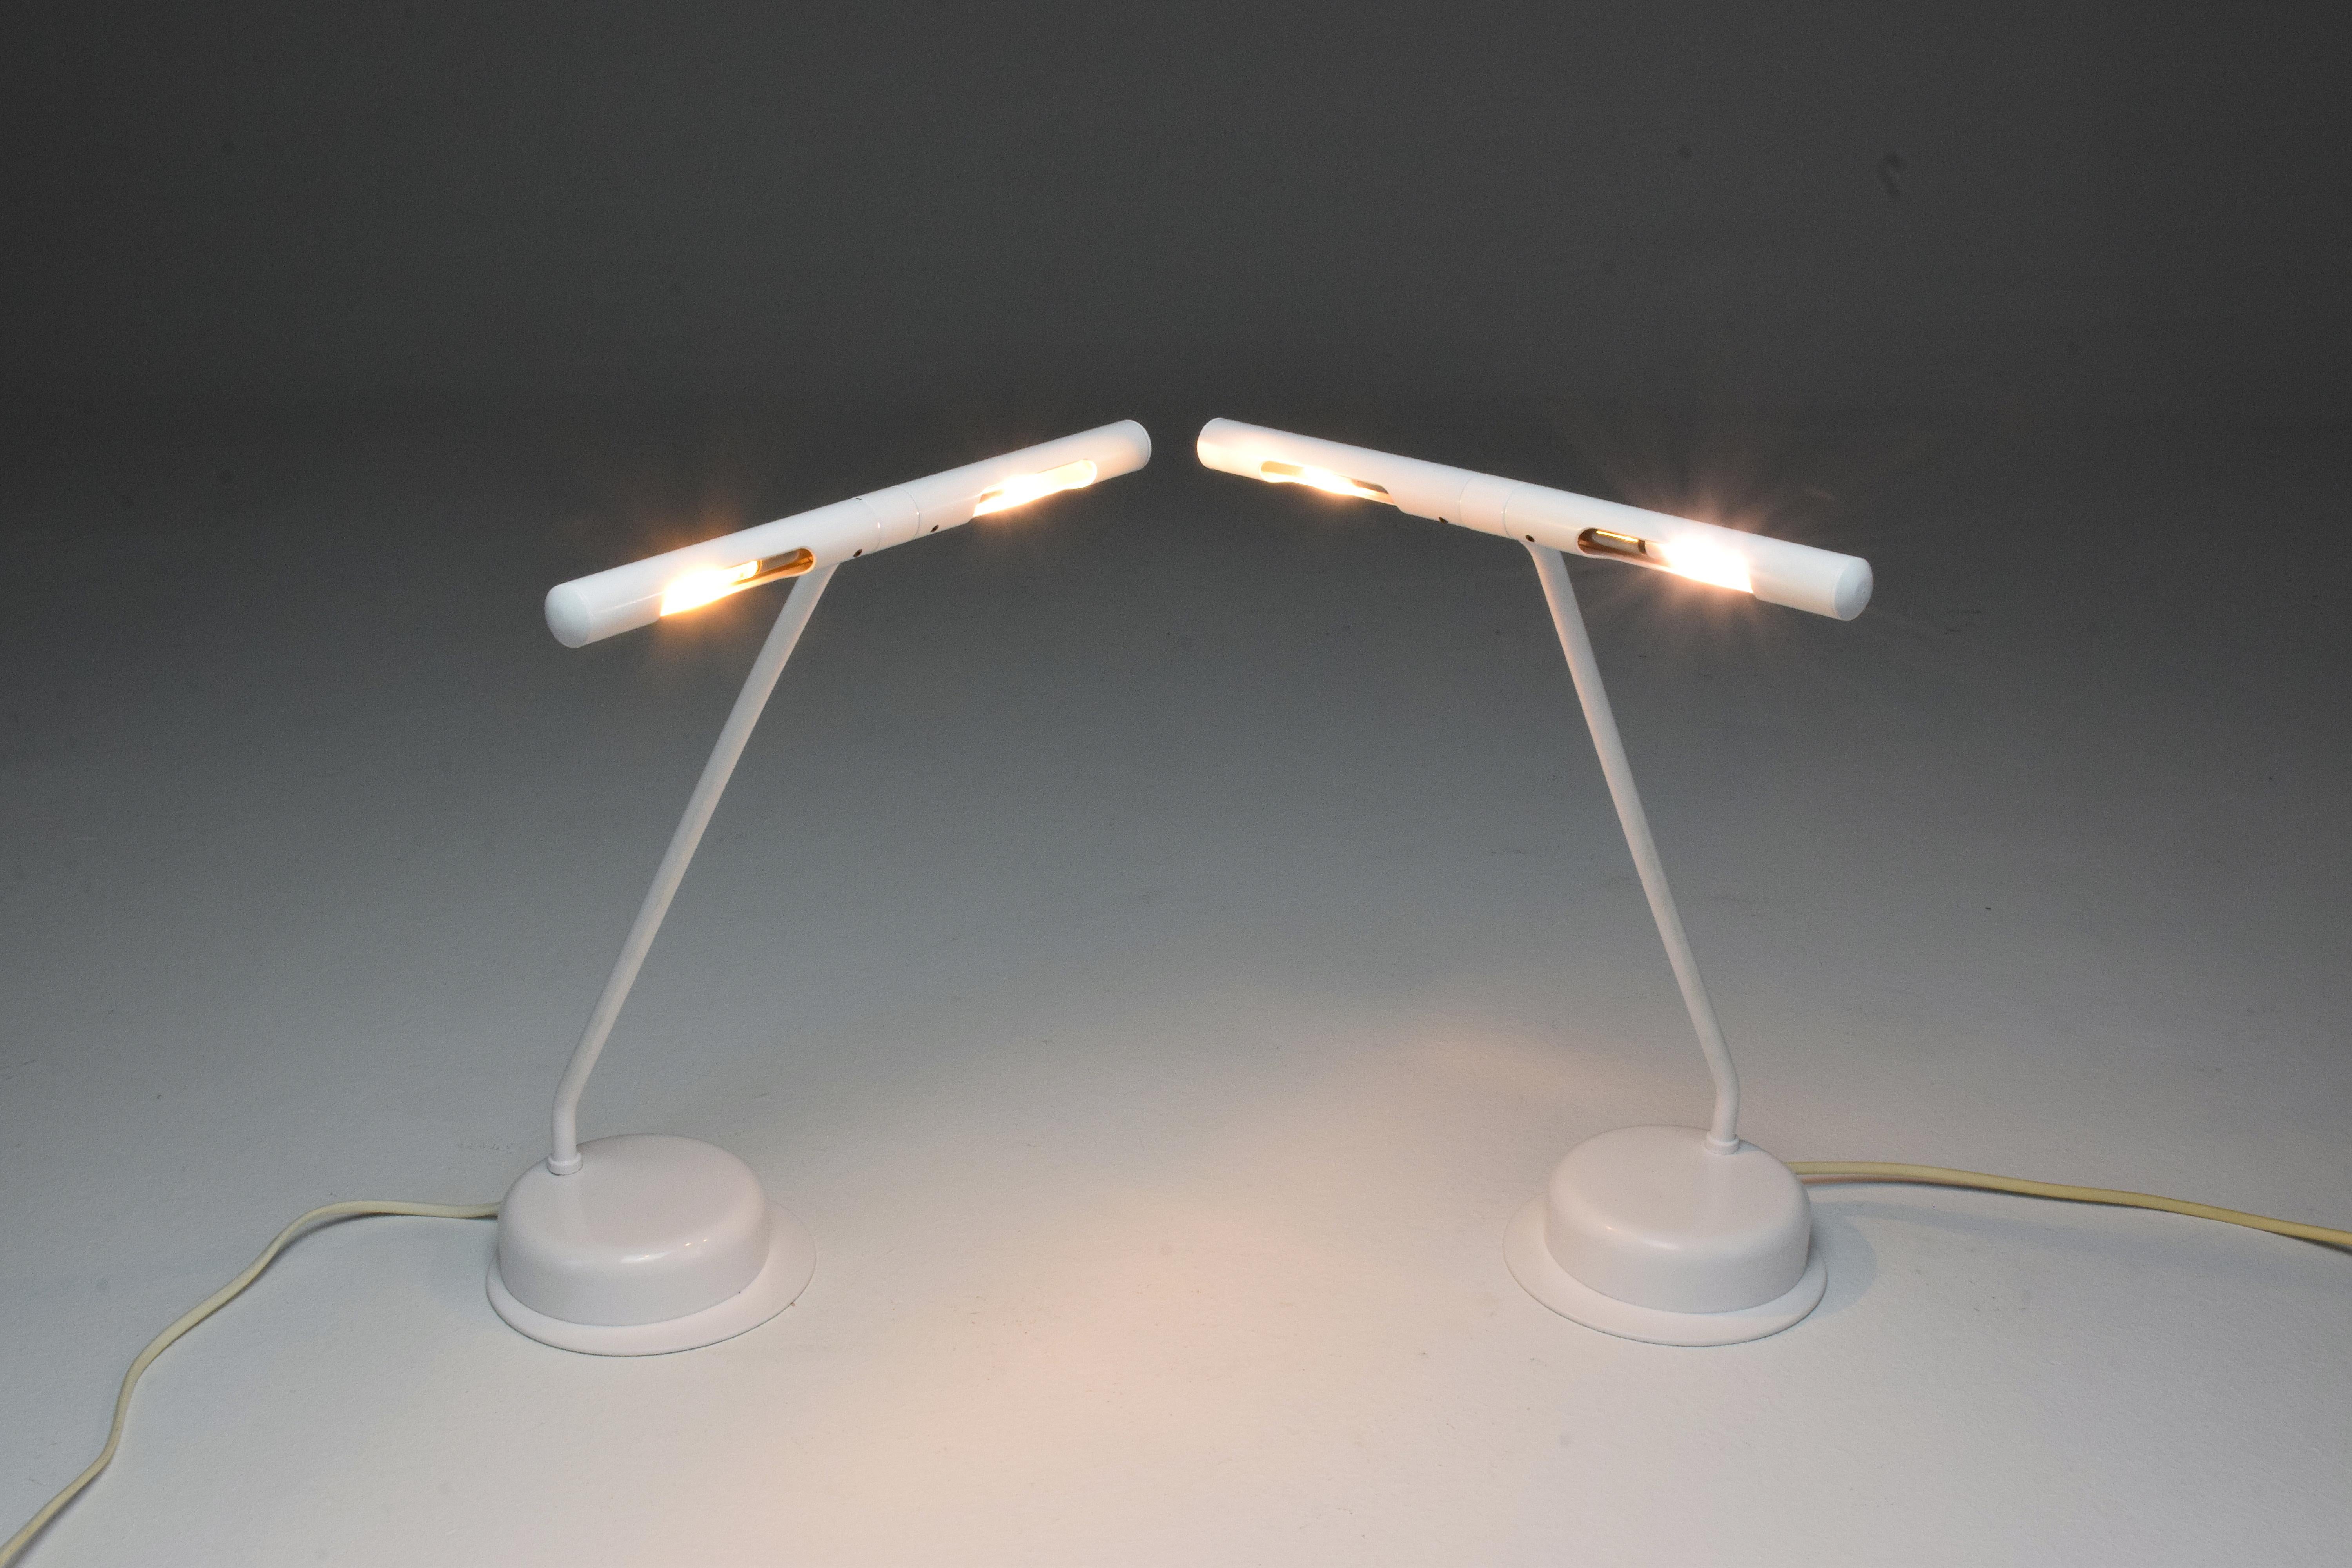 A pair of French 20th century vintage table or desk metal lamps designed with a rotatable shade, re-lacquered in their original white finish. One is very slightly lower than the other. The switch has been replaced but the wiring is original.